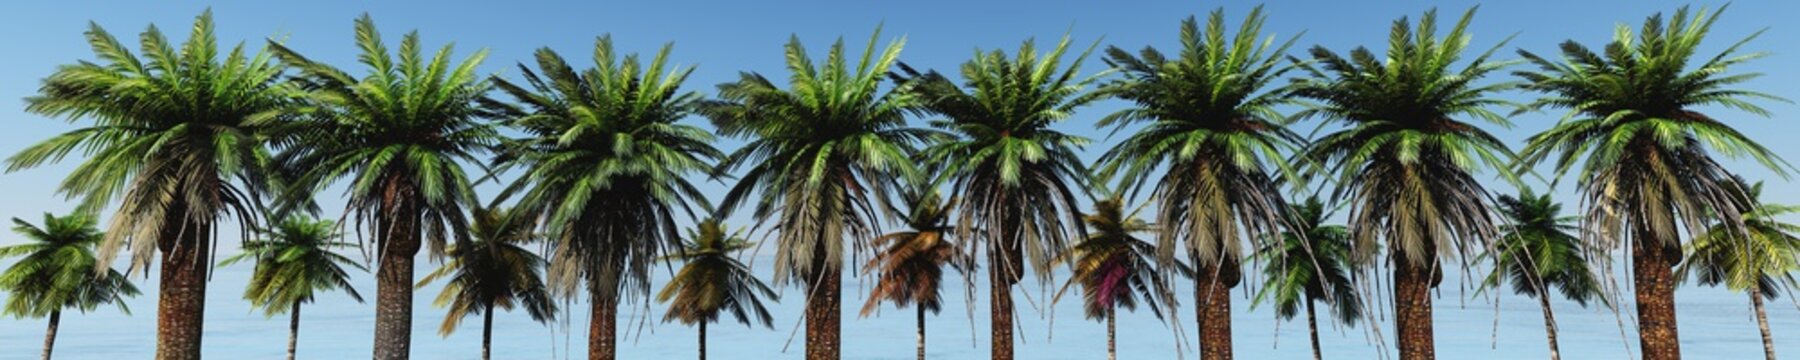 panorama of palm trees on the beach.